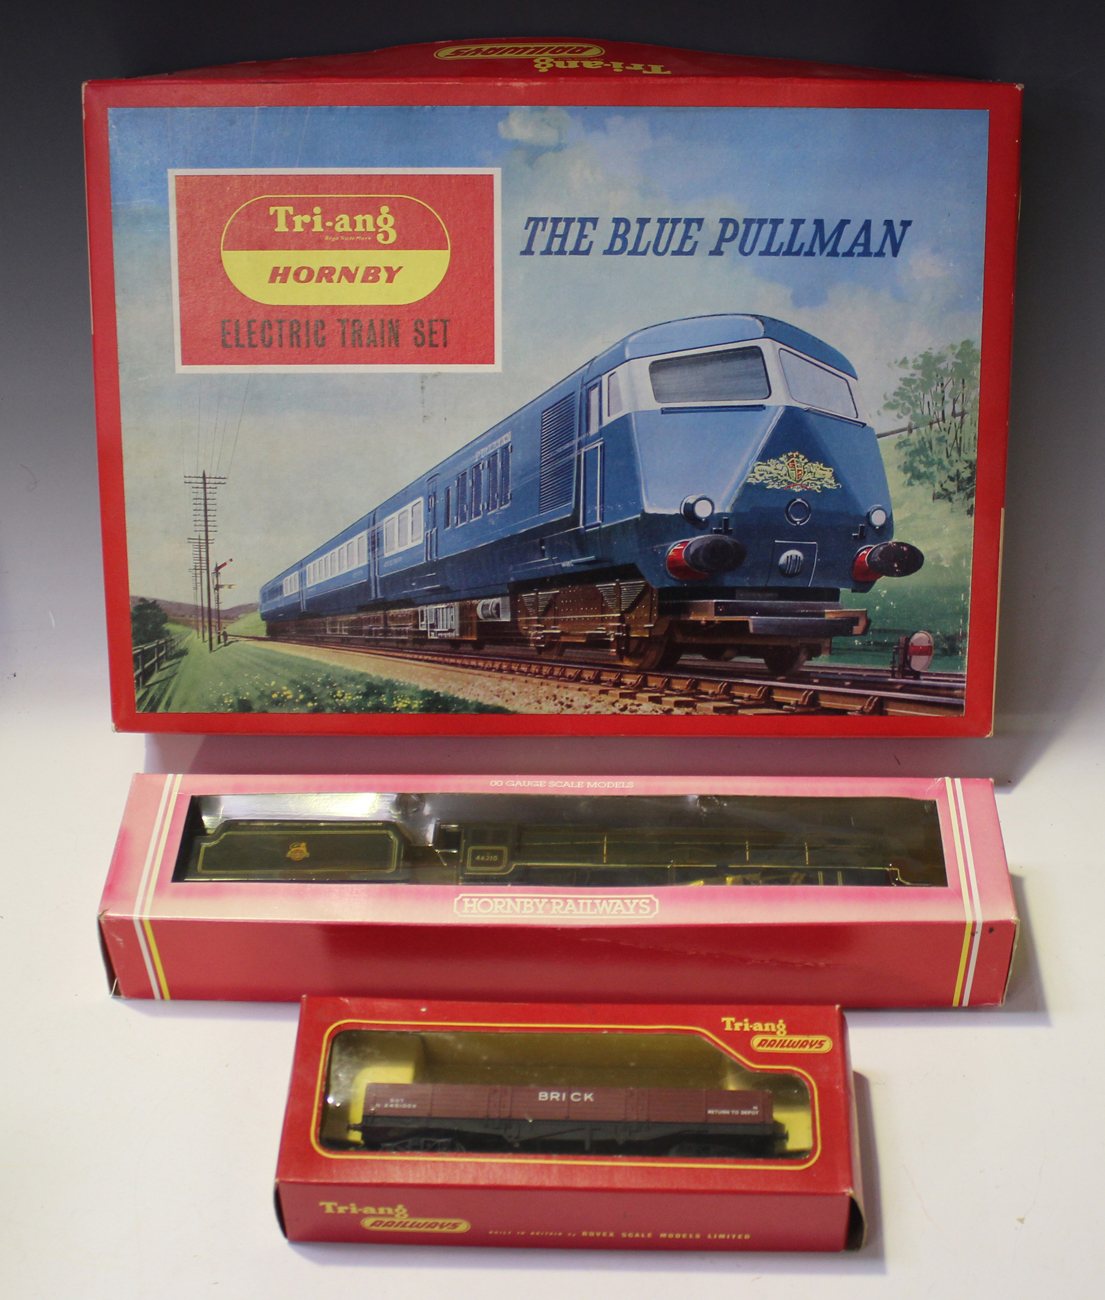 Triang Hornby Railways The Blue Pullman 1964 Poster A4 Size Advert Shop Sign 